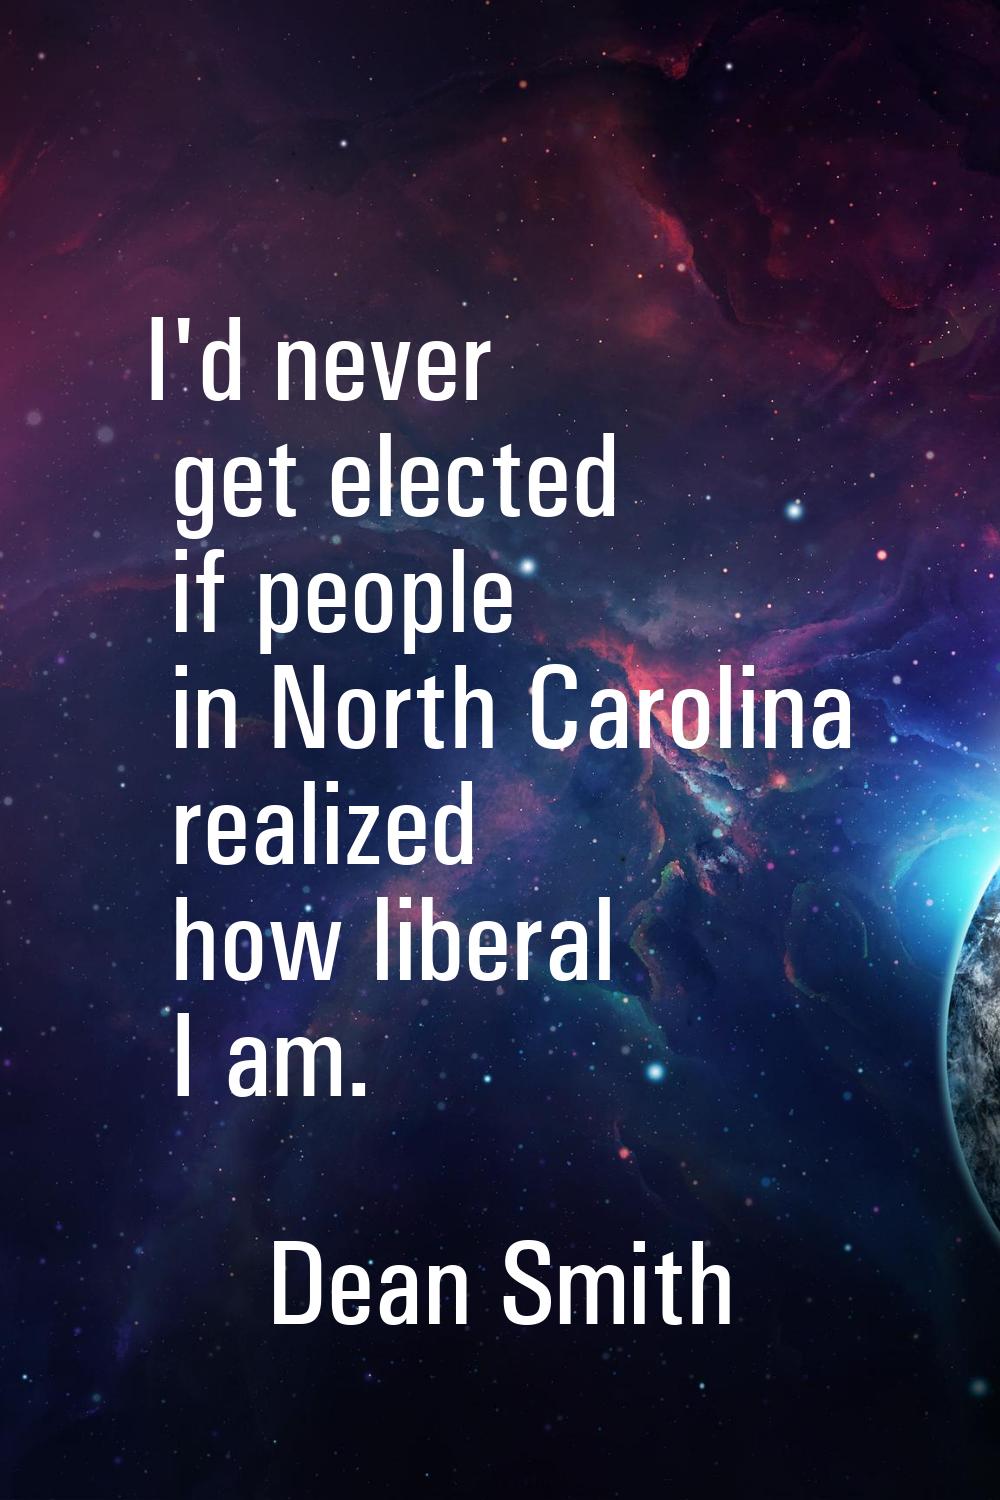 I'd never get elected if people in North Carolina realized how liberal I am.